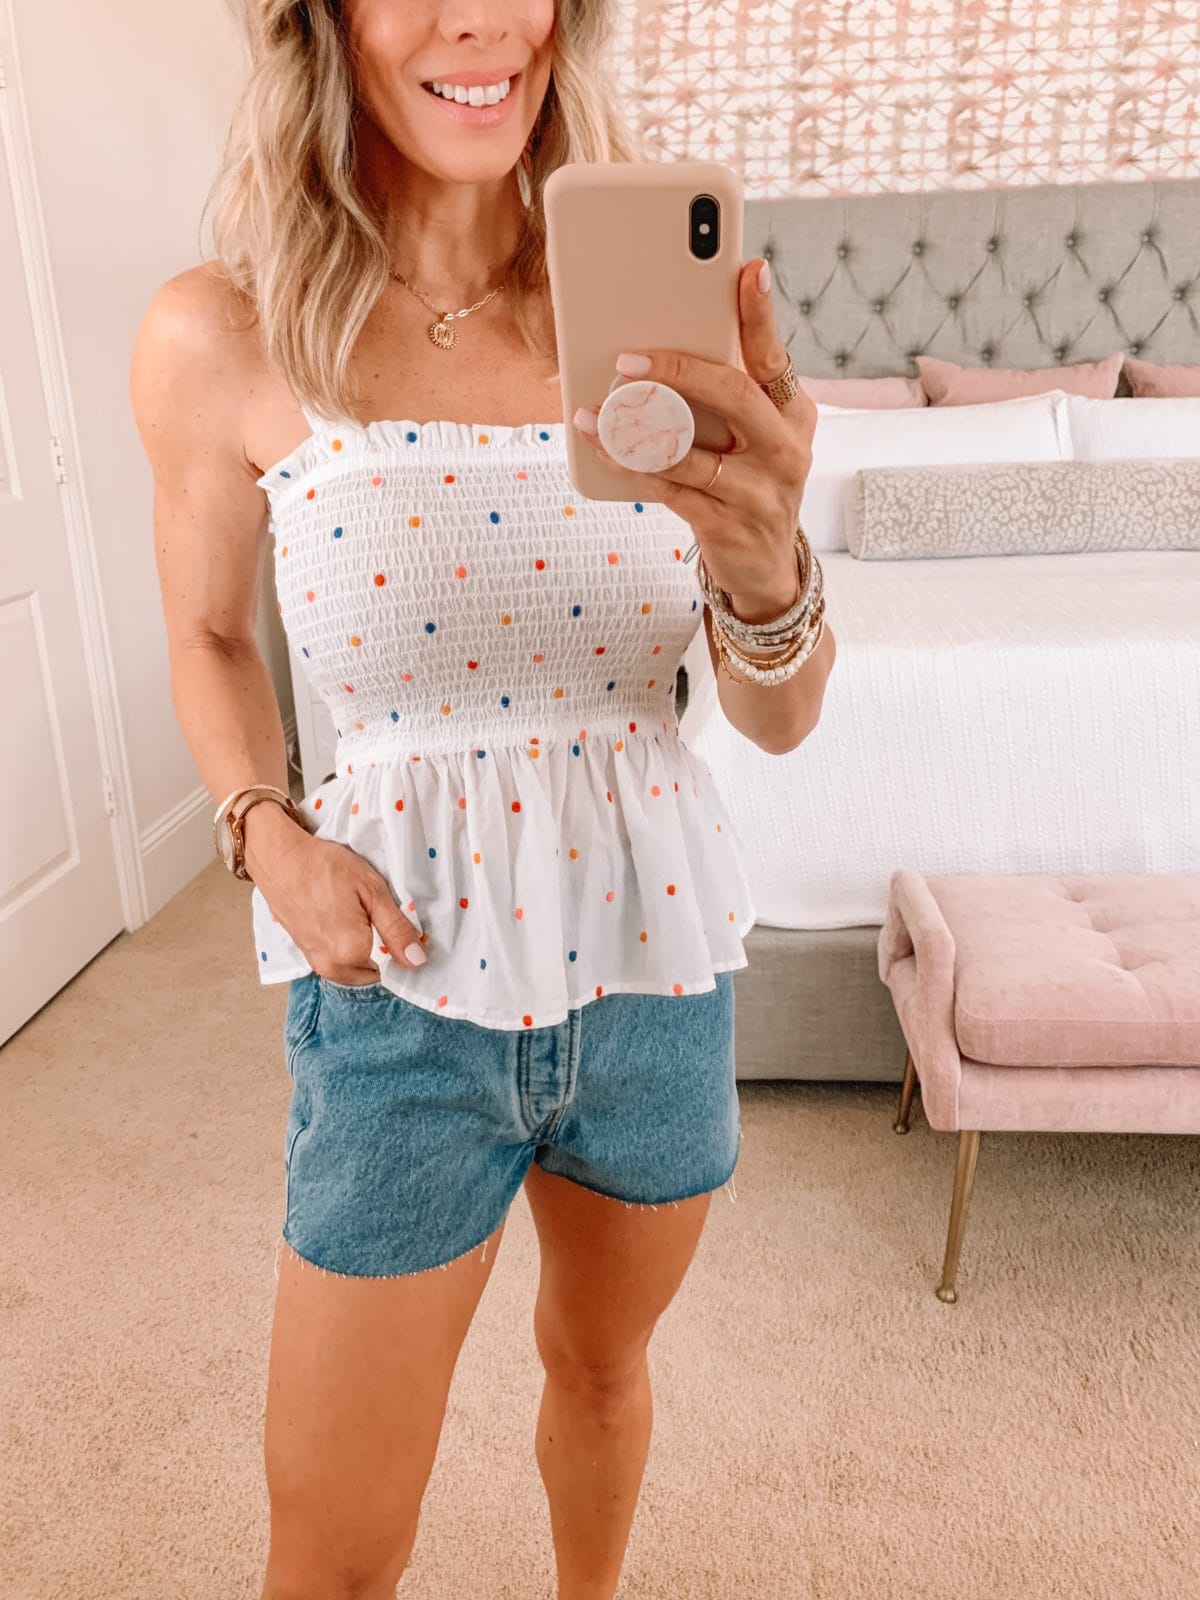 Dressing Room Finds, LOFT, Polka Dot Peplum top and shorts with sandals 